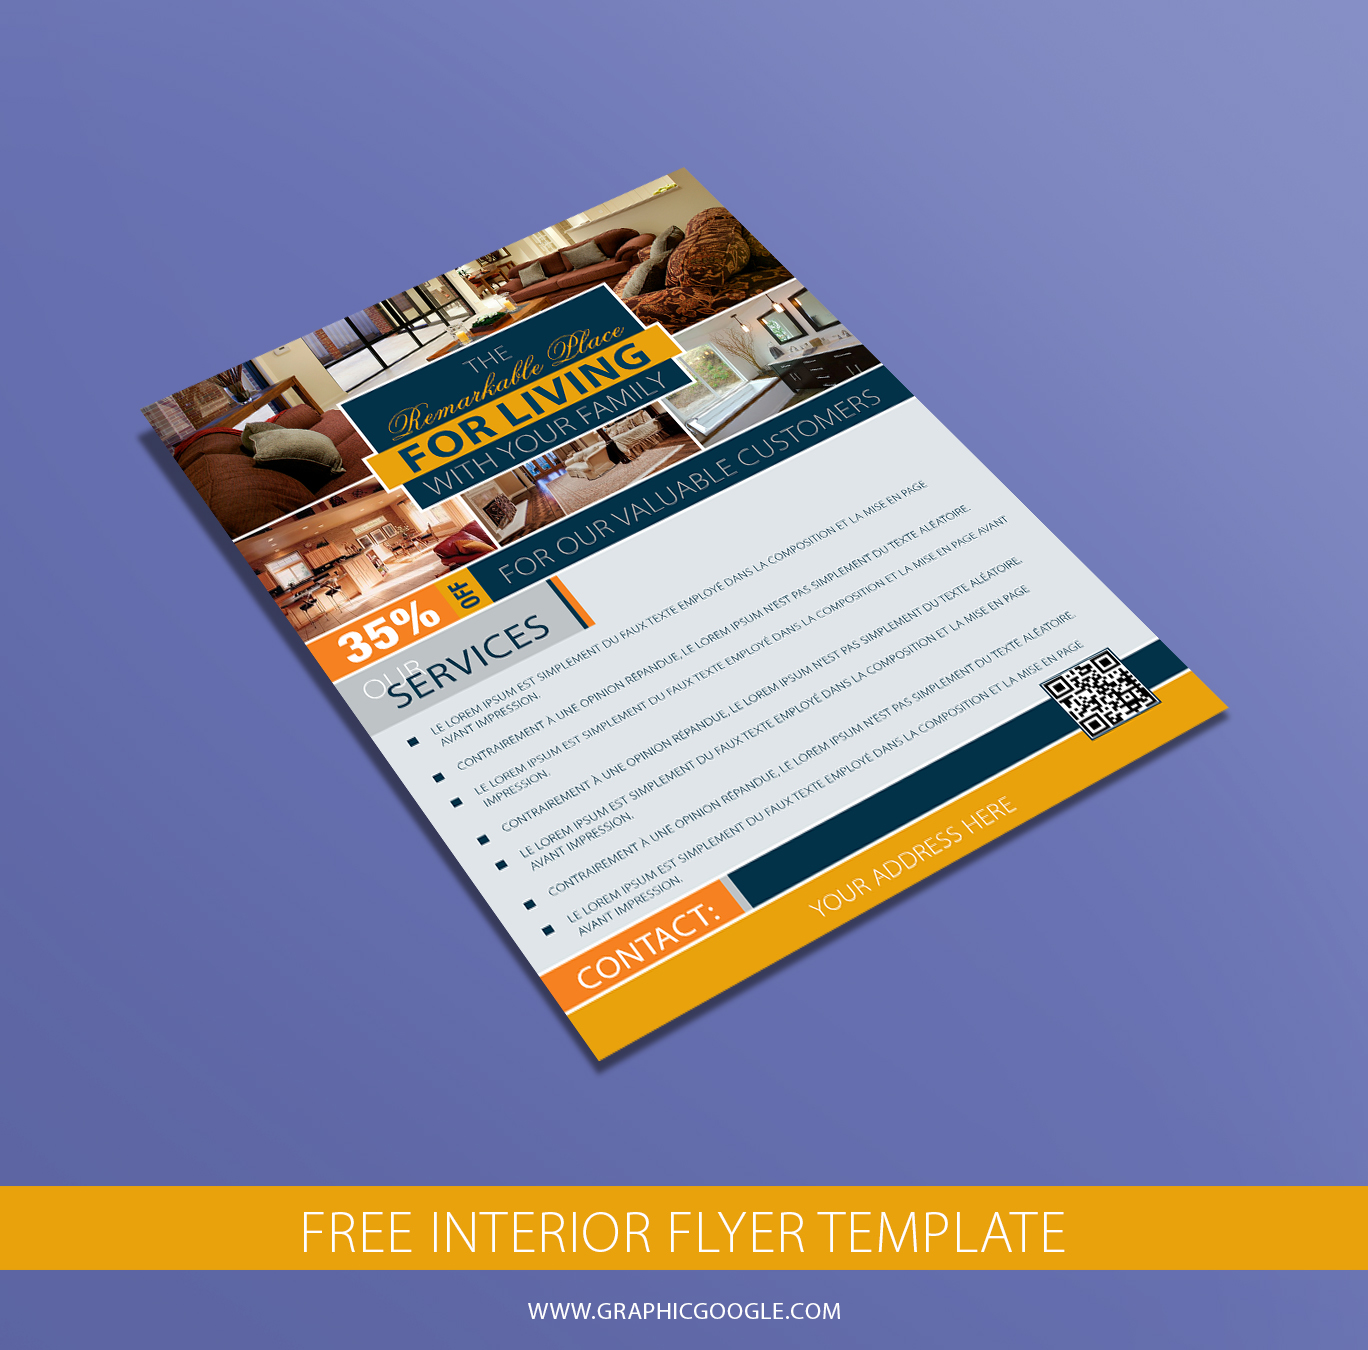 Free Interior Flyer Template